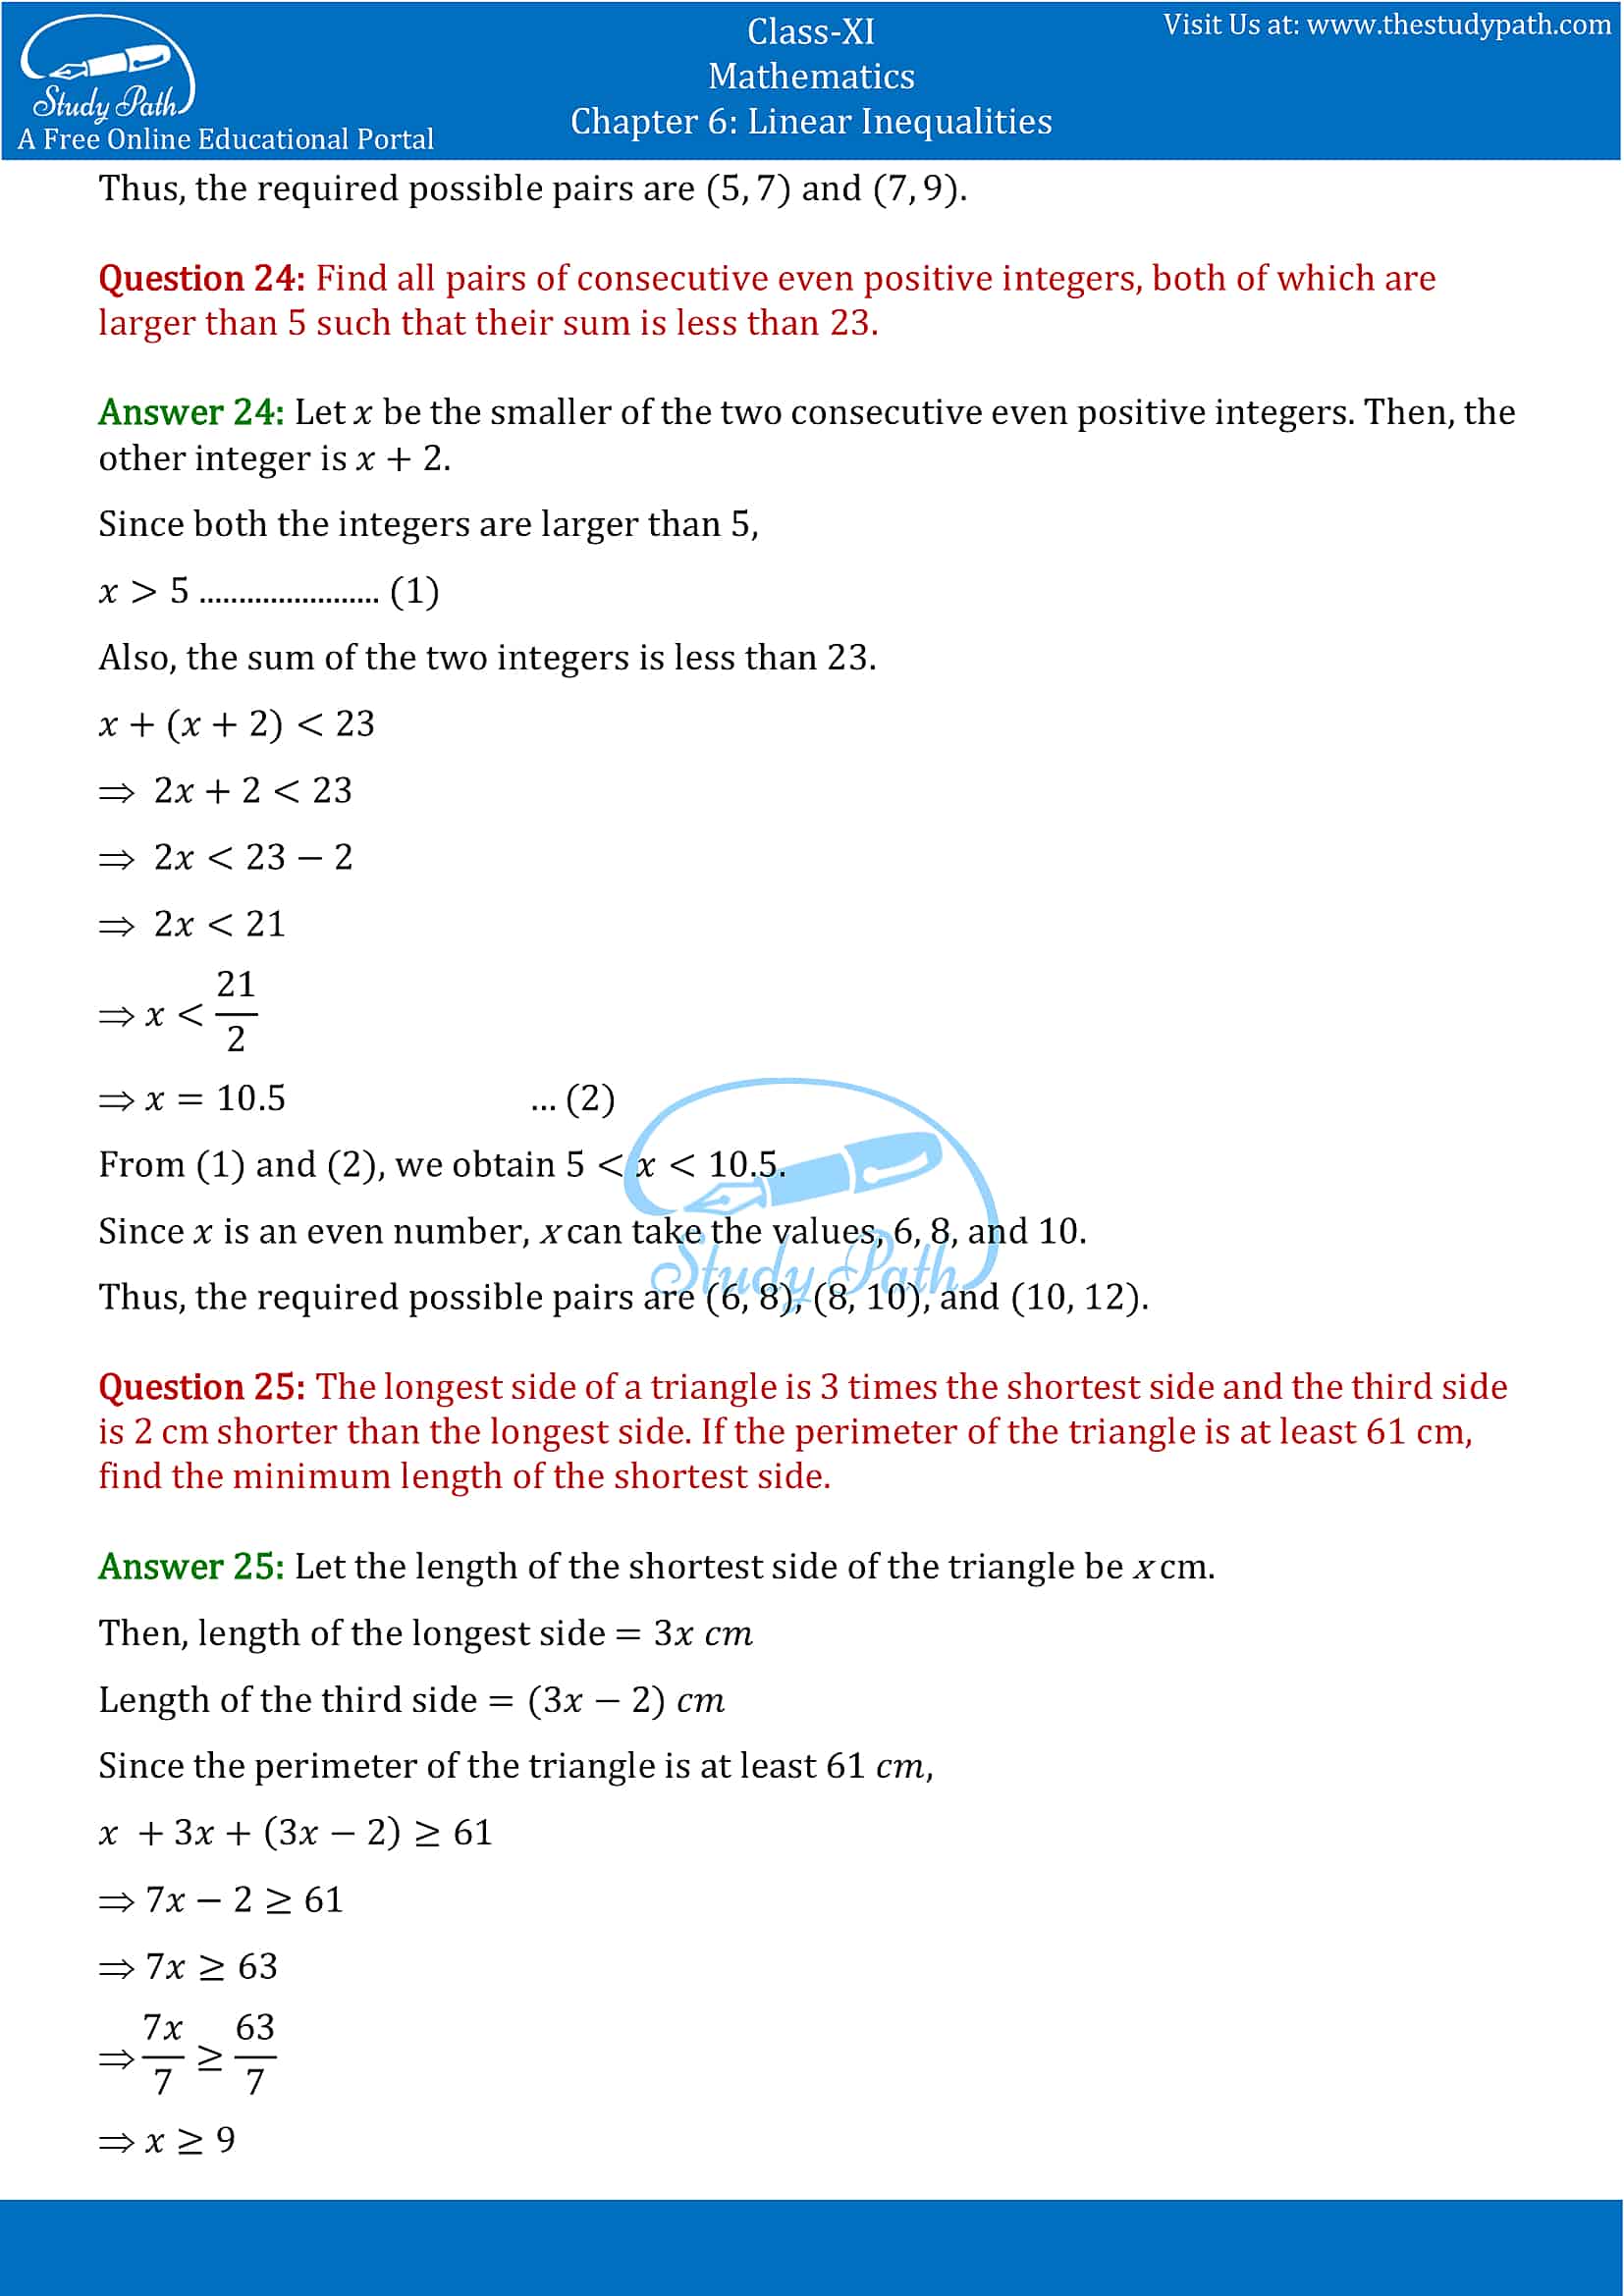 NCERT Solutions for Class 11 Maths chapter 6 Linear Inequalities Part-12